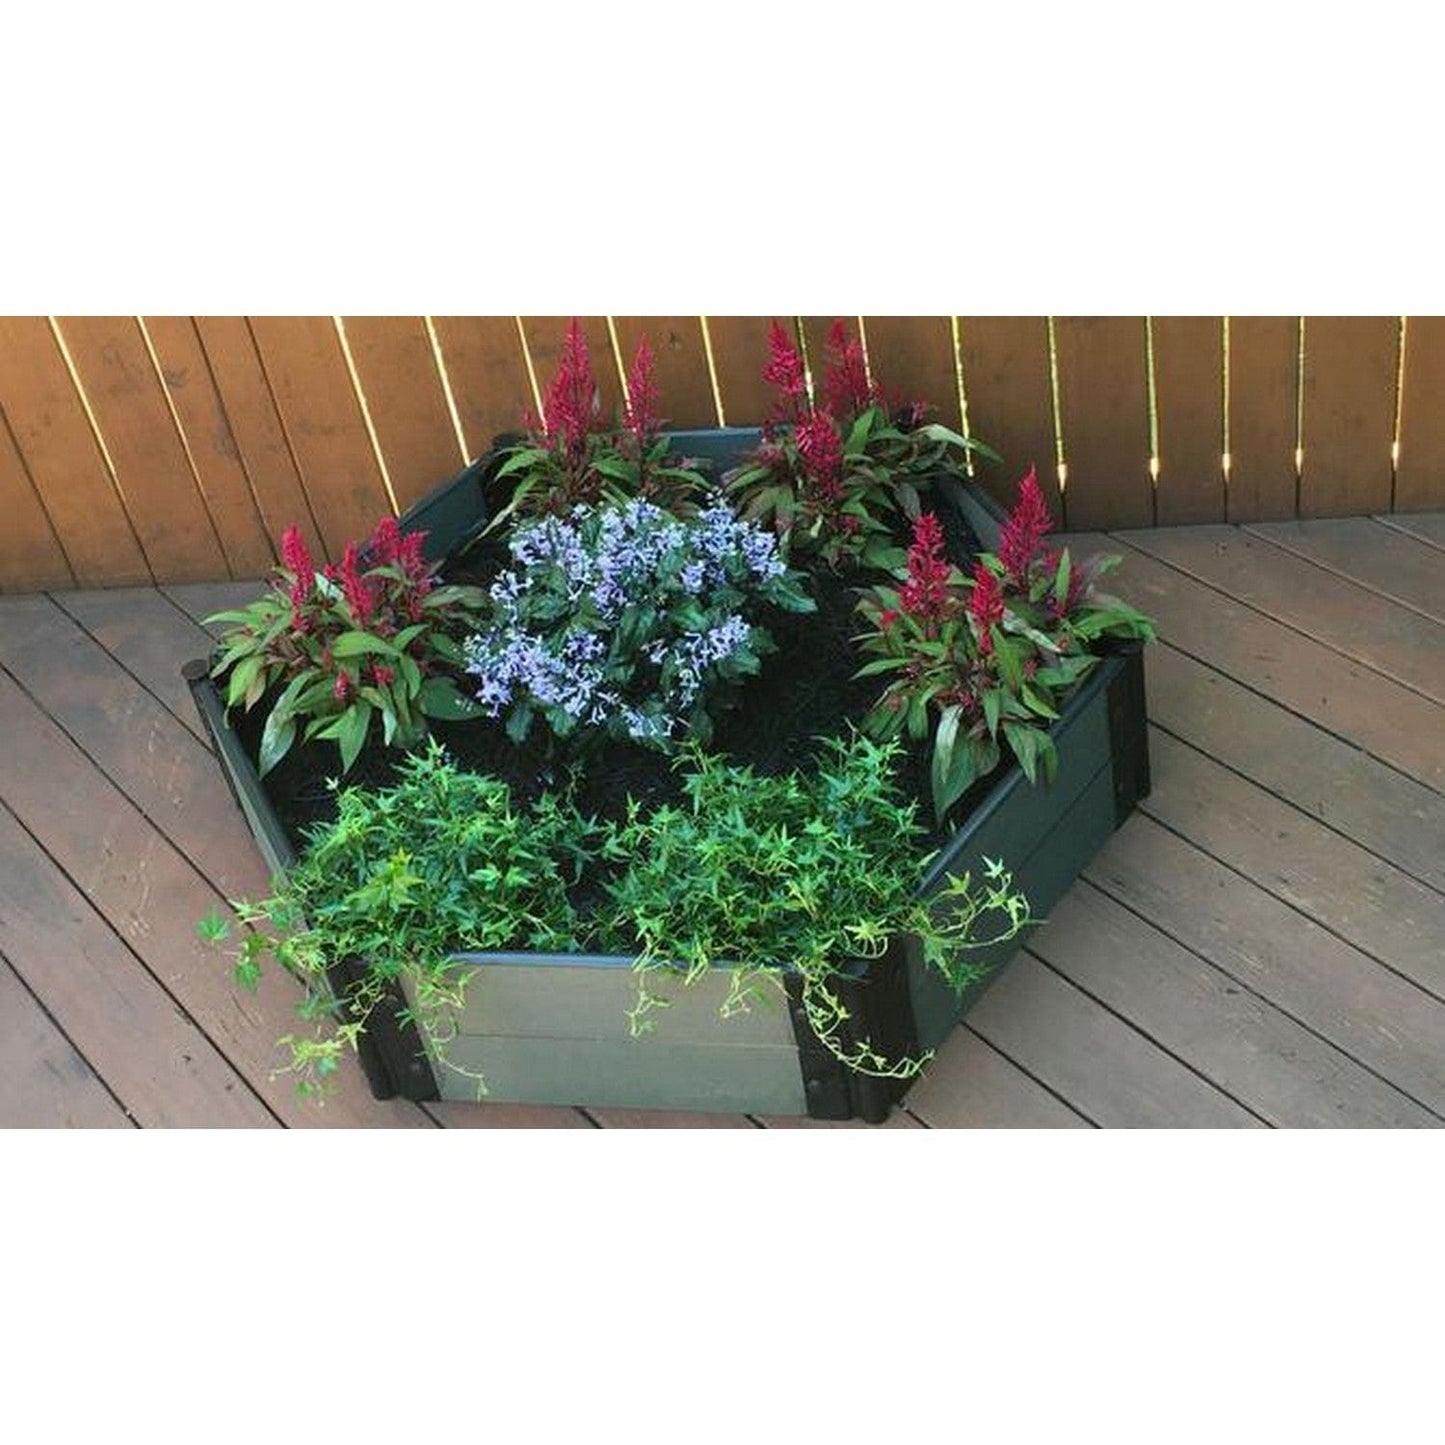 Frame It All Gardening Accessories Frame It All | Tool-Free Fort Jefferson Raised Garden Bed (Hexagon) 4' X 4' X 22" - Weathered Wood - 1" Profile 200004468